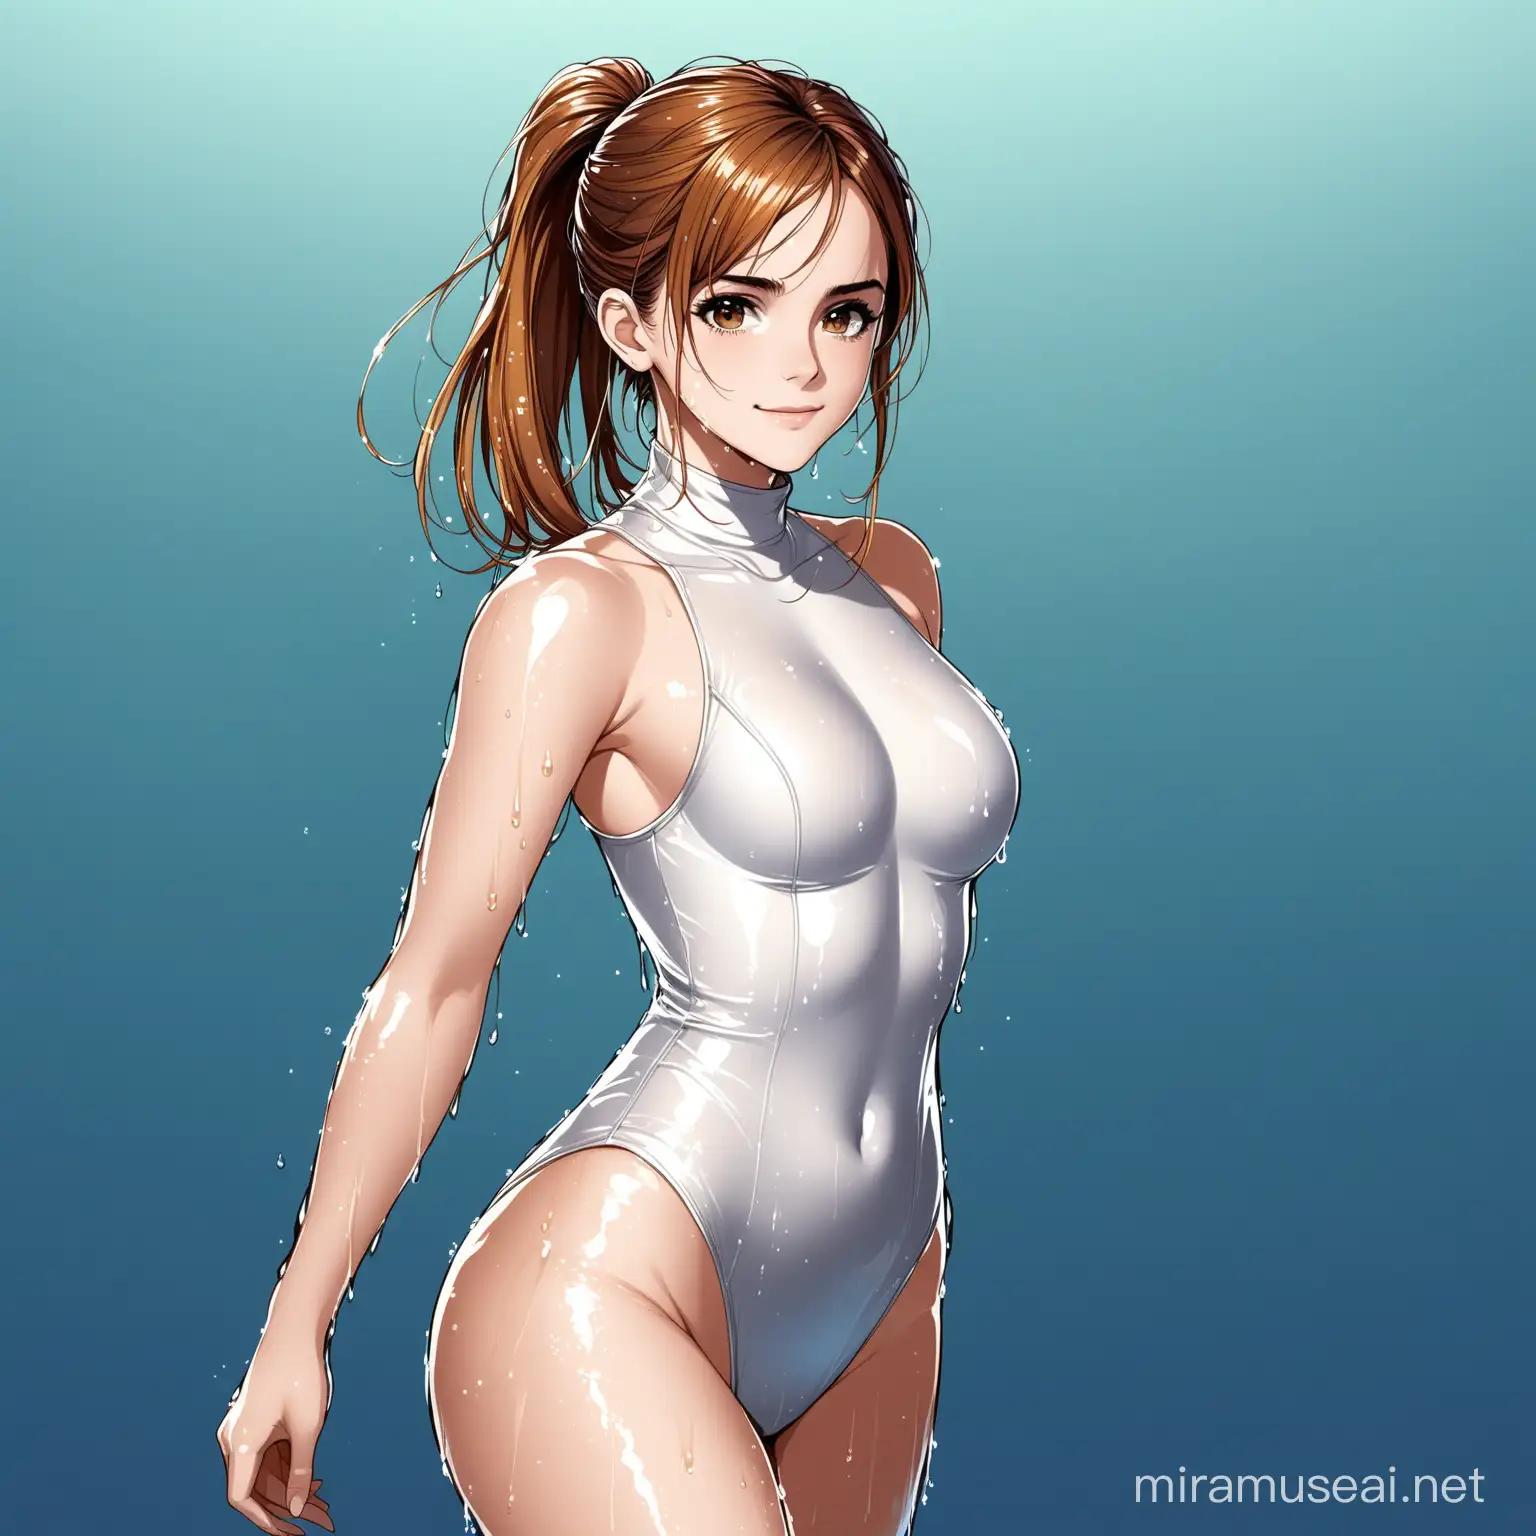 Emma Watson, Anime Girl, Glossy One Piece Turtleneck Swimsuit, Wet Hair, Ponytail, Seductive Smile, Gorgeous Womanly Body, Perfect Skin, Digital Art, High Definition